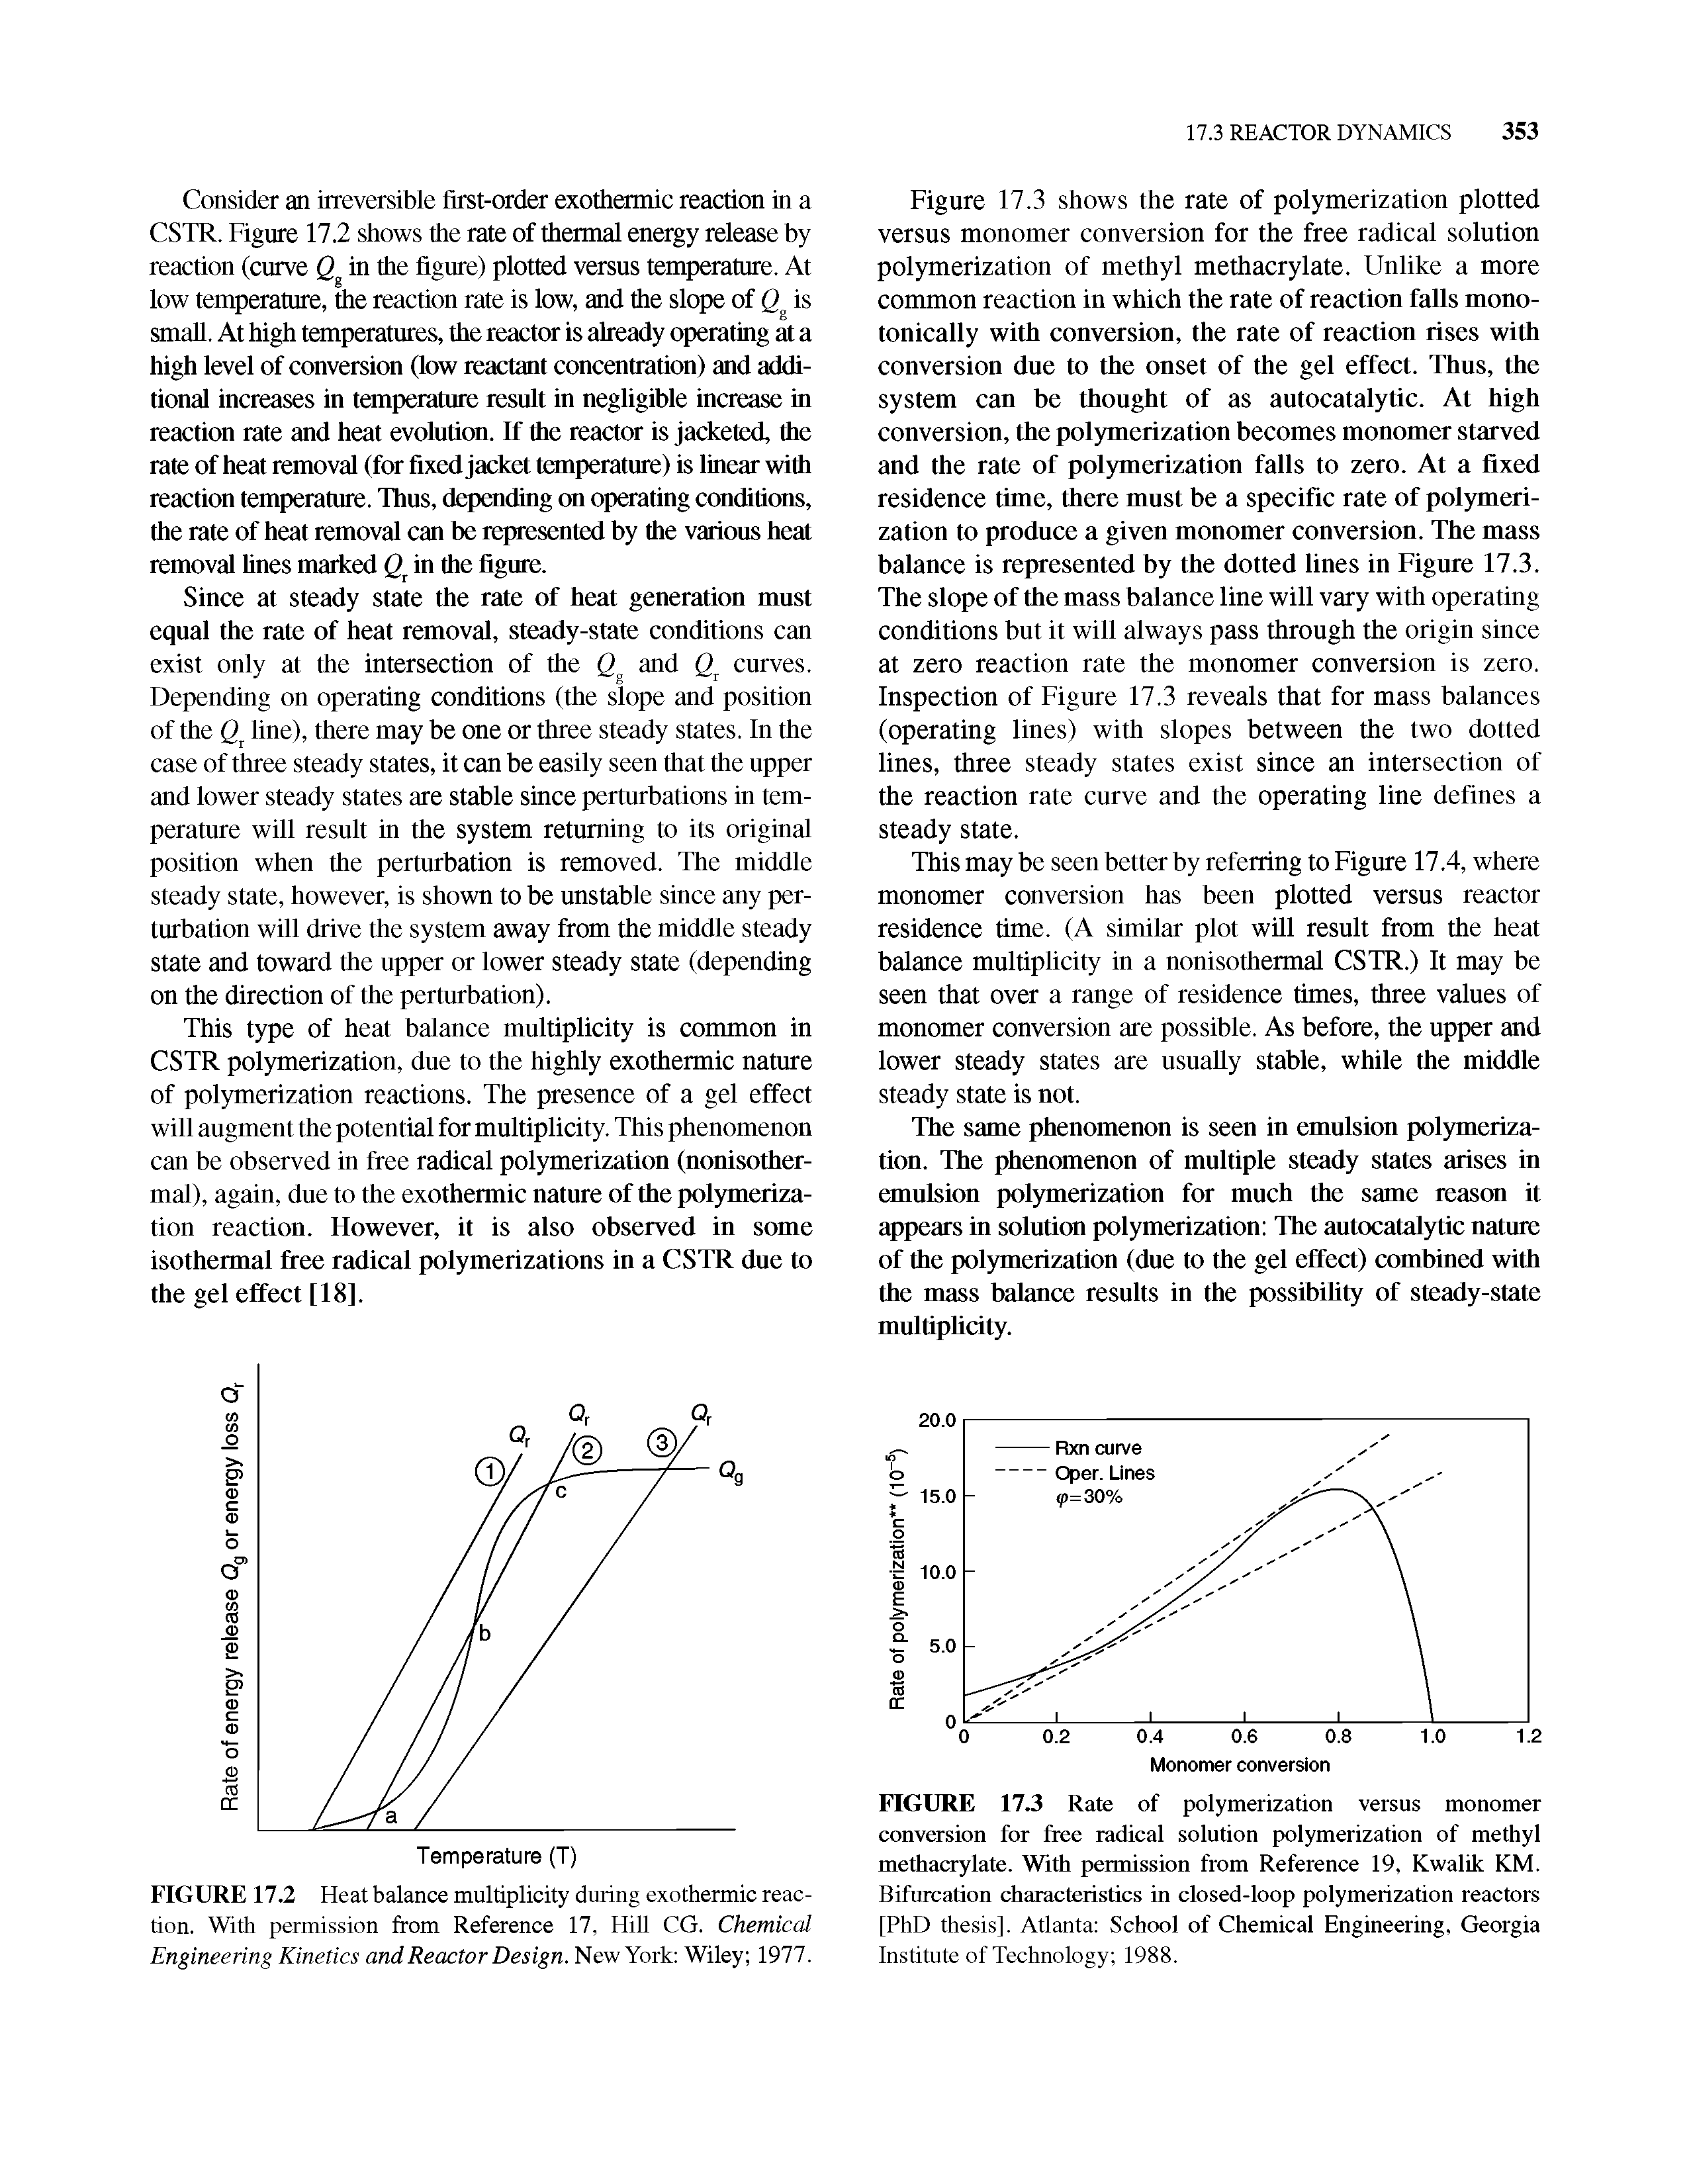 Figure 17.3 shows the rate of polymerization plotted versus monomer conversion for the free radical solution polymerization of methyl methacrylate. Unlike a more common reaction in which the rate of reaction falls mono-tonically with conversion, the rate of reaction rises with conversion due to the onset of the gel effect. Thus, the system can be thought of as autocatalytic. At high conversion, the polymerization becomes monomer starved and the rate of polymerization falls to zero. At a fixed residence time, there must be a specific rate of polymerization to produce a given monomer conversion. The mass balance is represented by the dotted lines in Figure 17.3. The slope of the mass balance line will vary with operating conditions bnt it will always pass through the origin since at zero reaction rate the monomer conversion is zero. Inspection of Fignre 17.3 reveals that for mass balances (operating lines) with slopes between the two dotted lines, three steady states exist since an intersection of the reaction rate curve and the operating line defines a steady state.